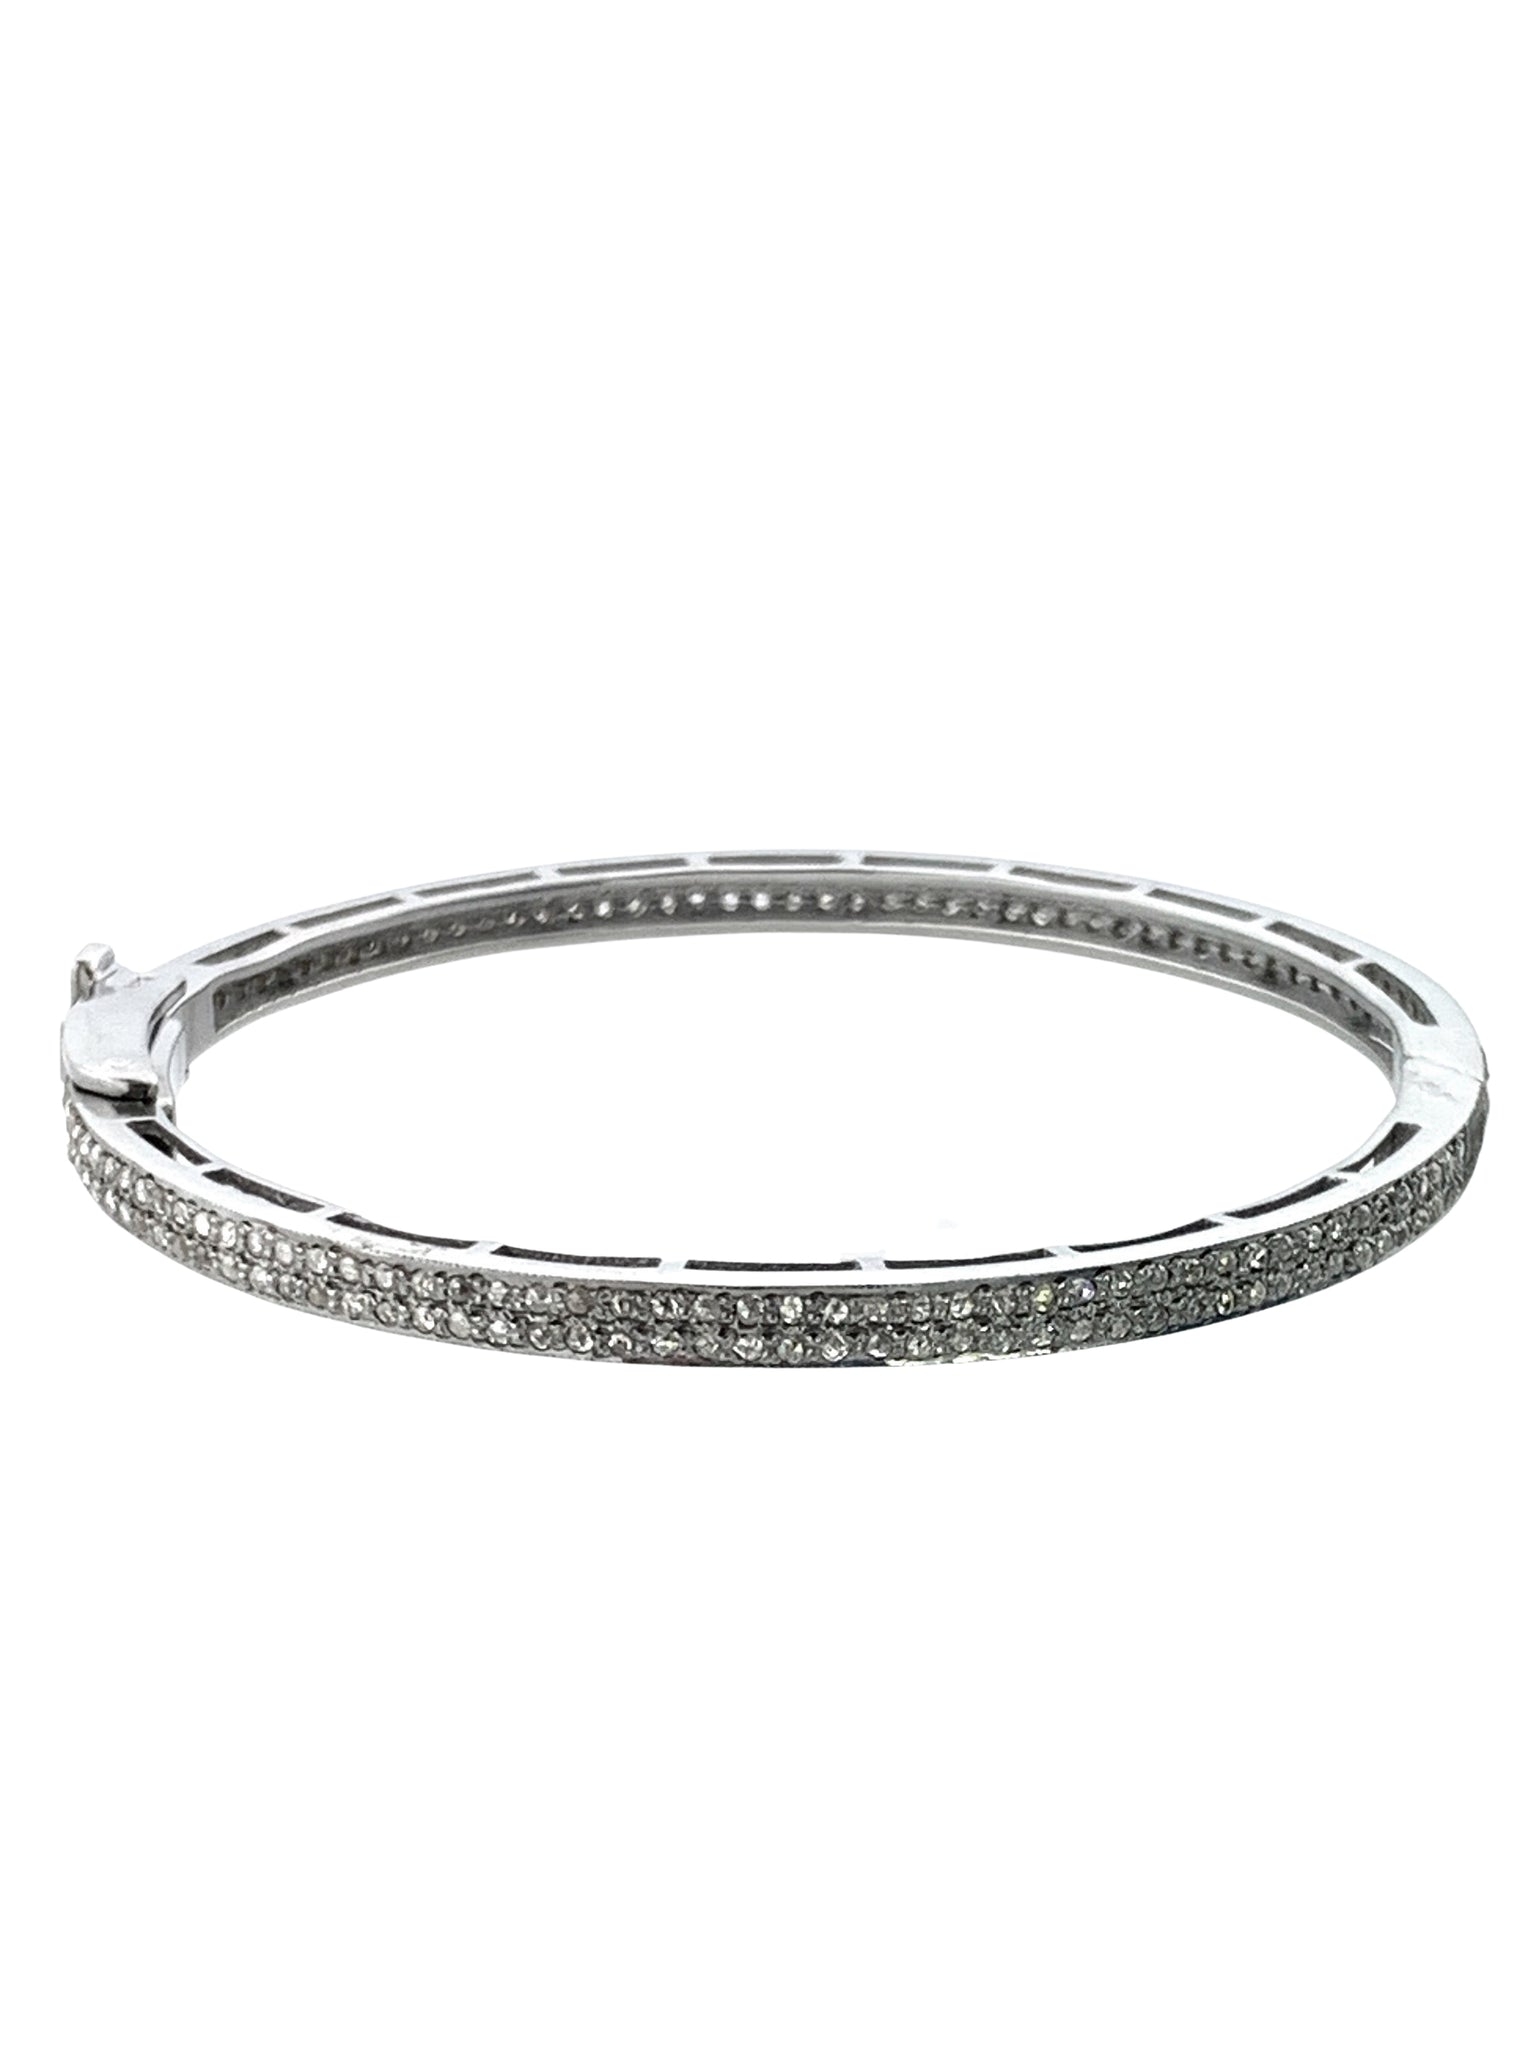 Pave Diamond Double Row Bangle set in Sterling Silver